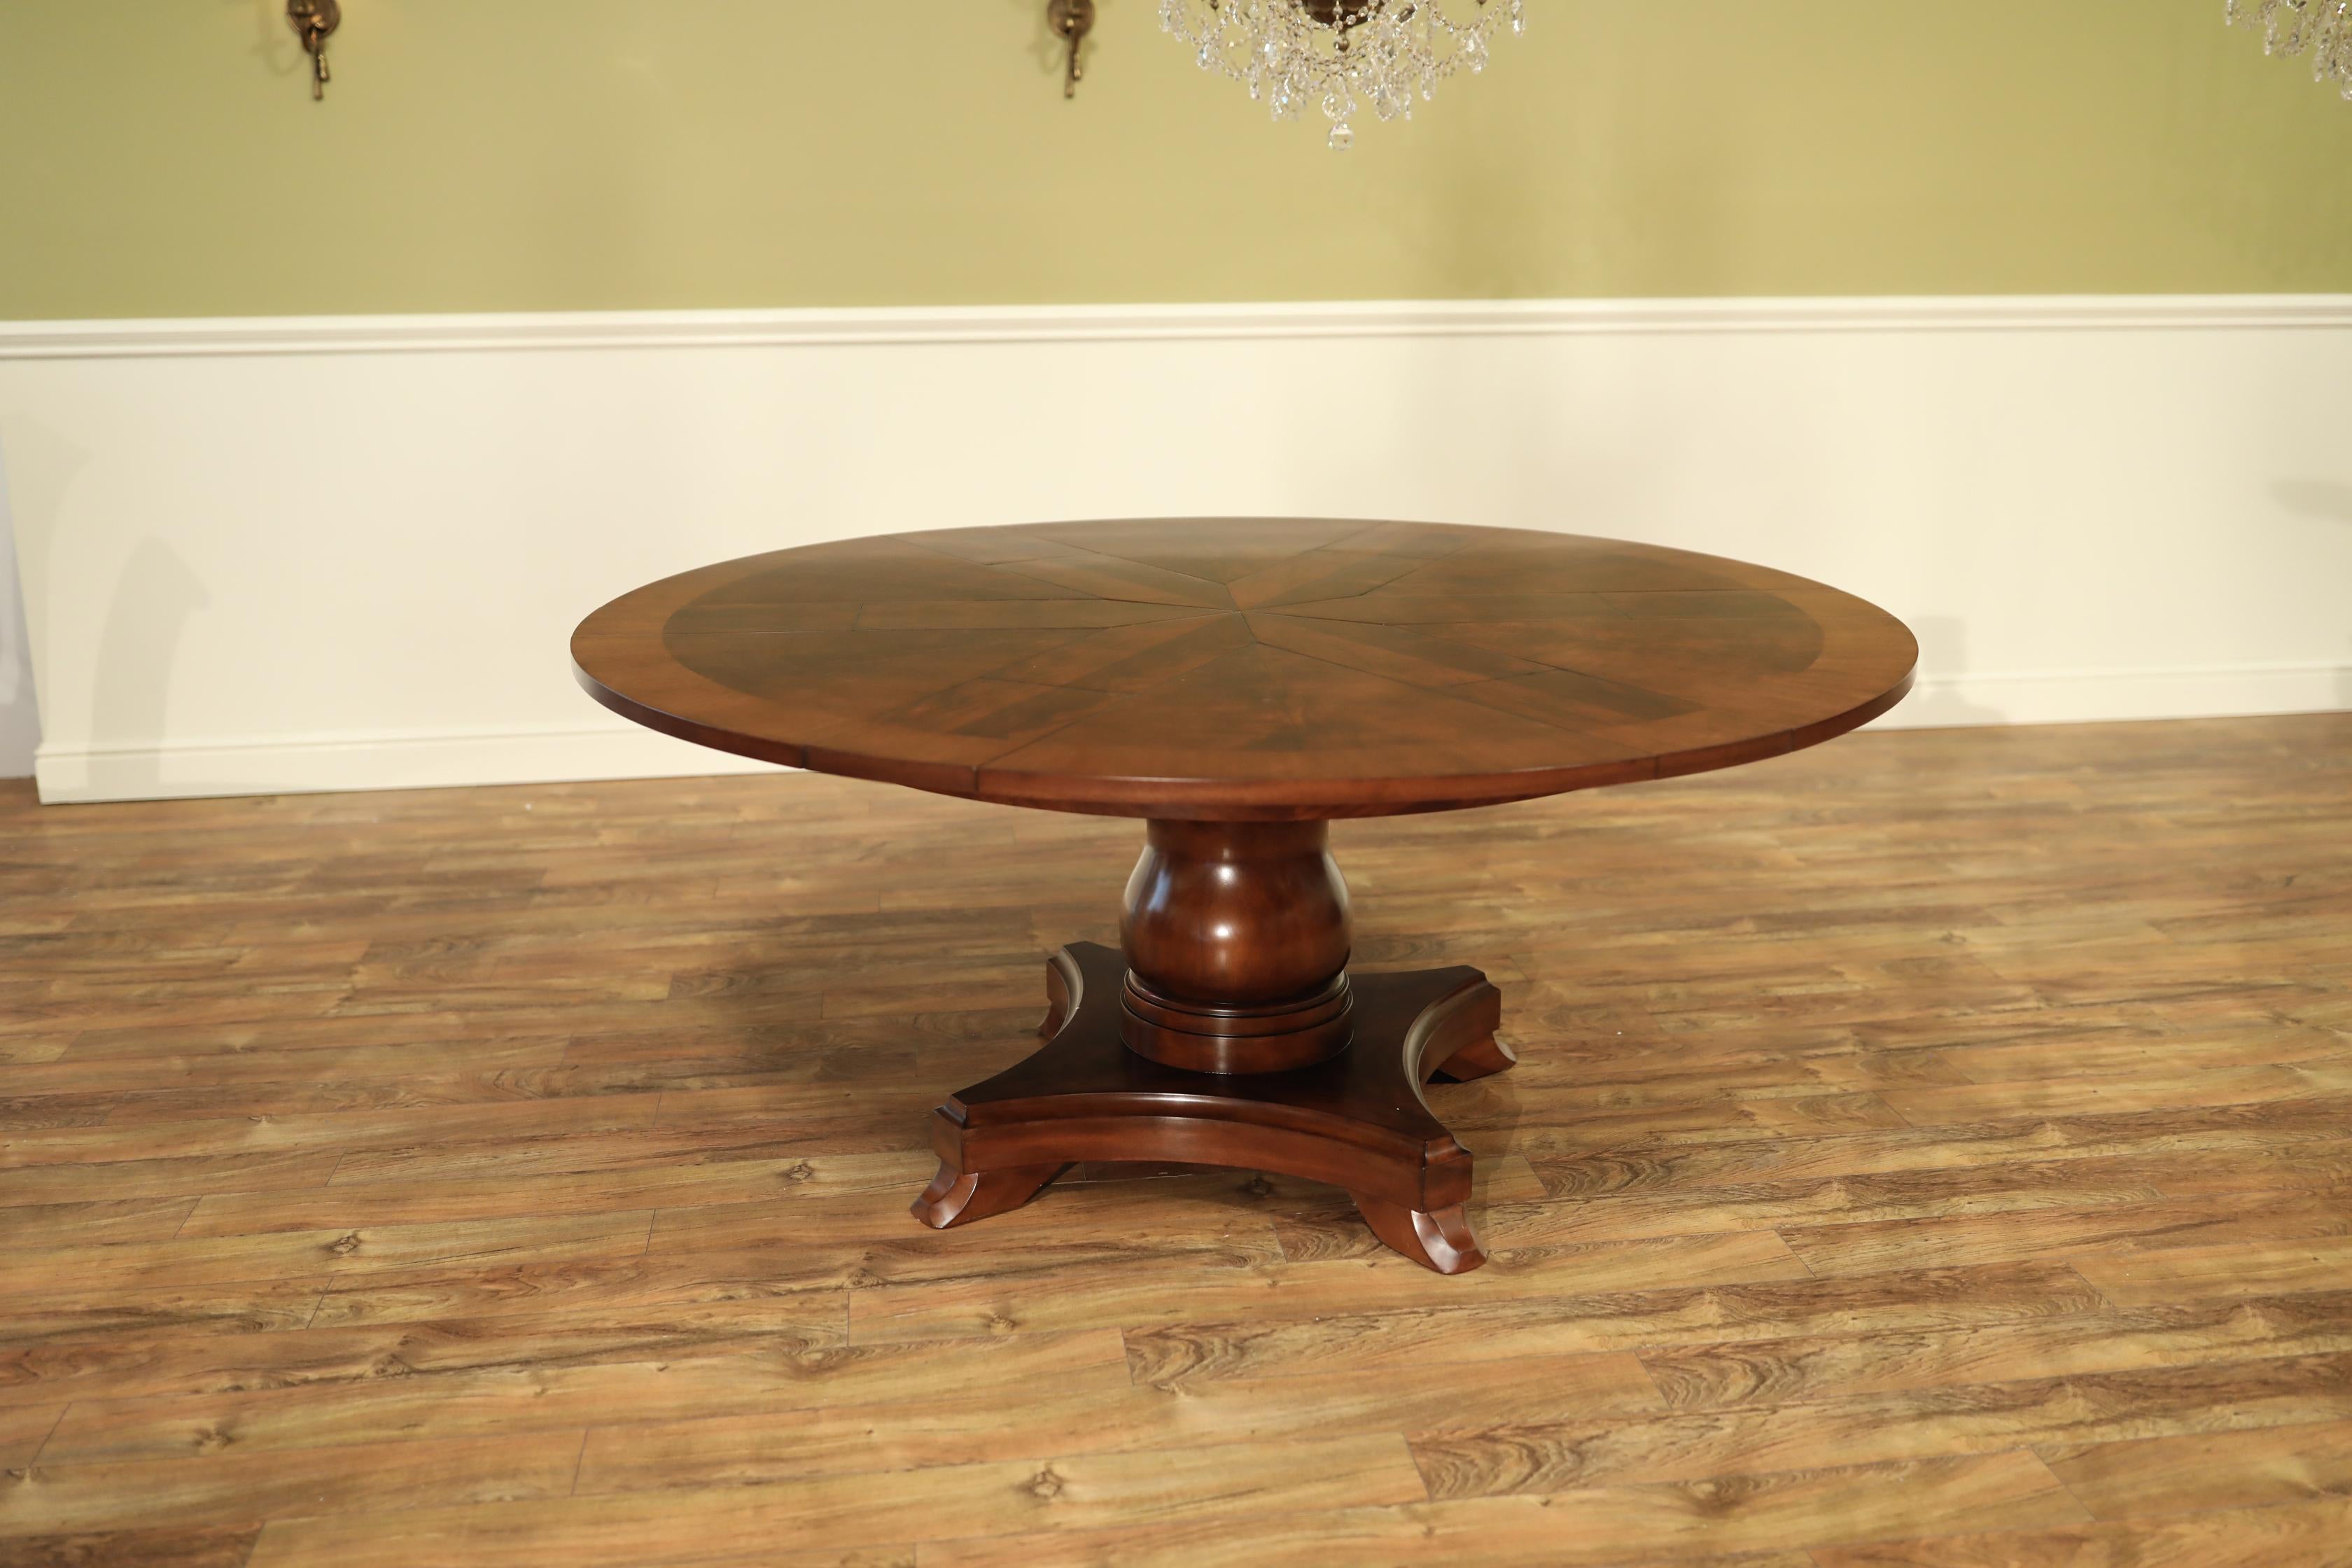 This is round Jupe style traditional mahogany dining table by Leighton Hall. It is one of our new prototype designs. It features a radial cut field of West African swirly crotch mahogany and a border of satinwood. The Jupe design allows the leaves